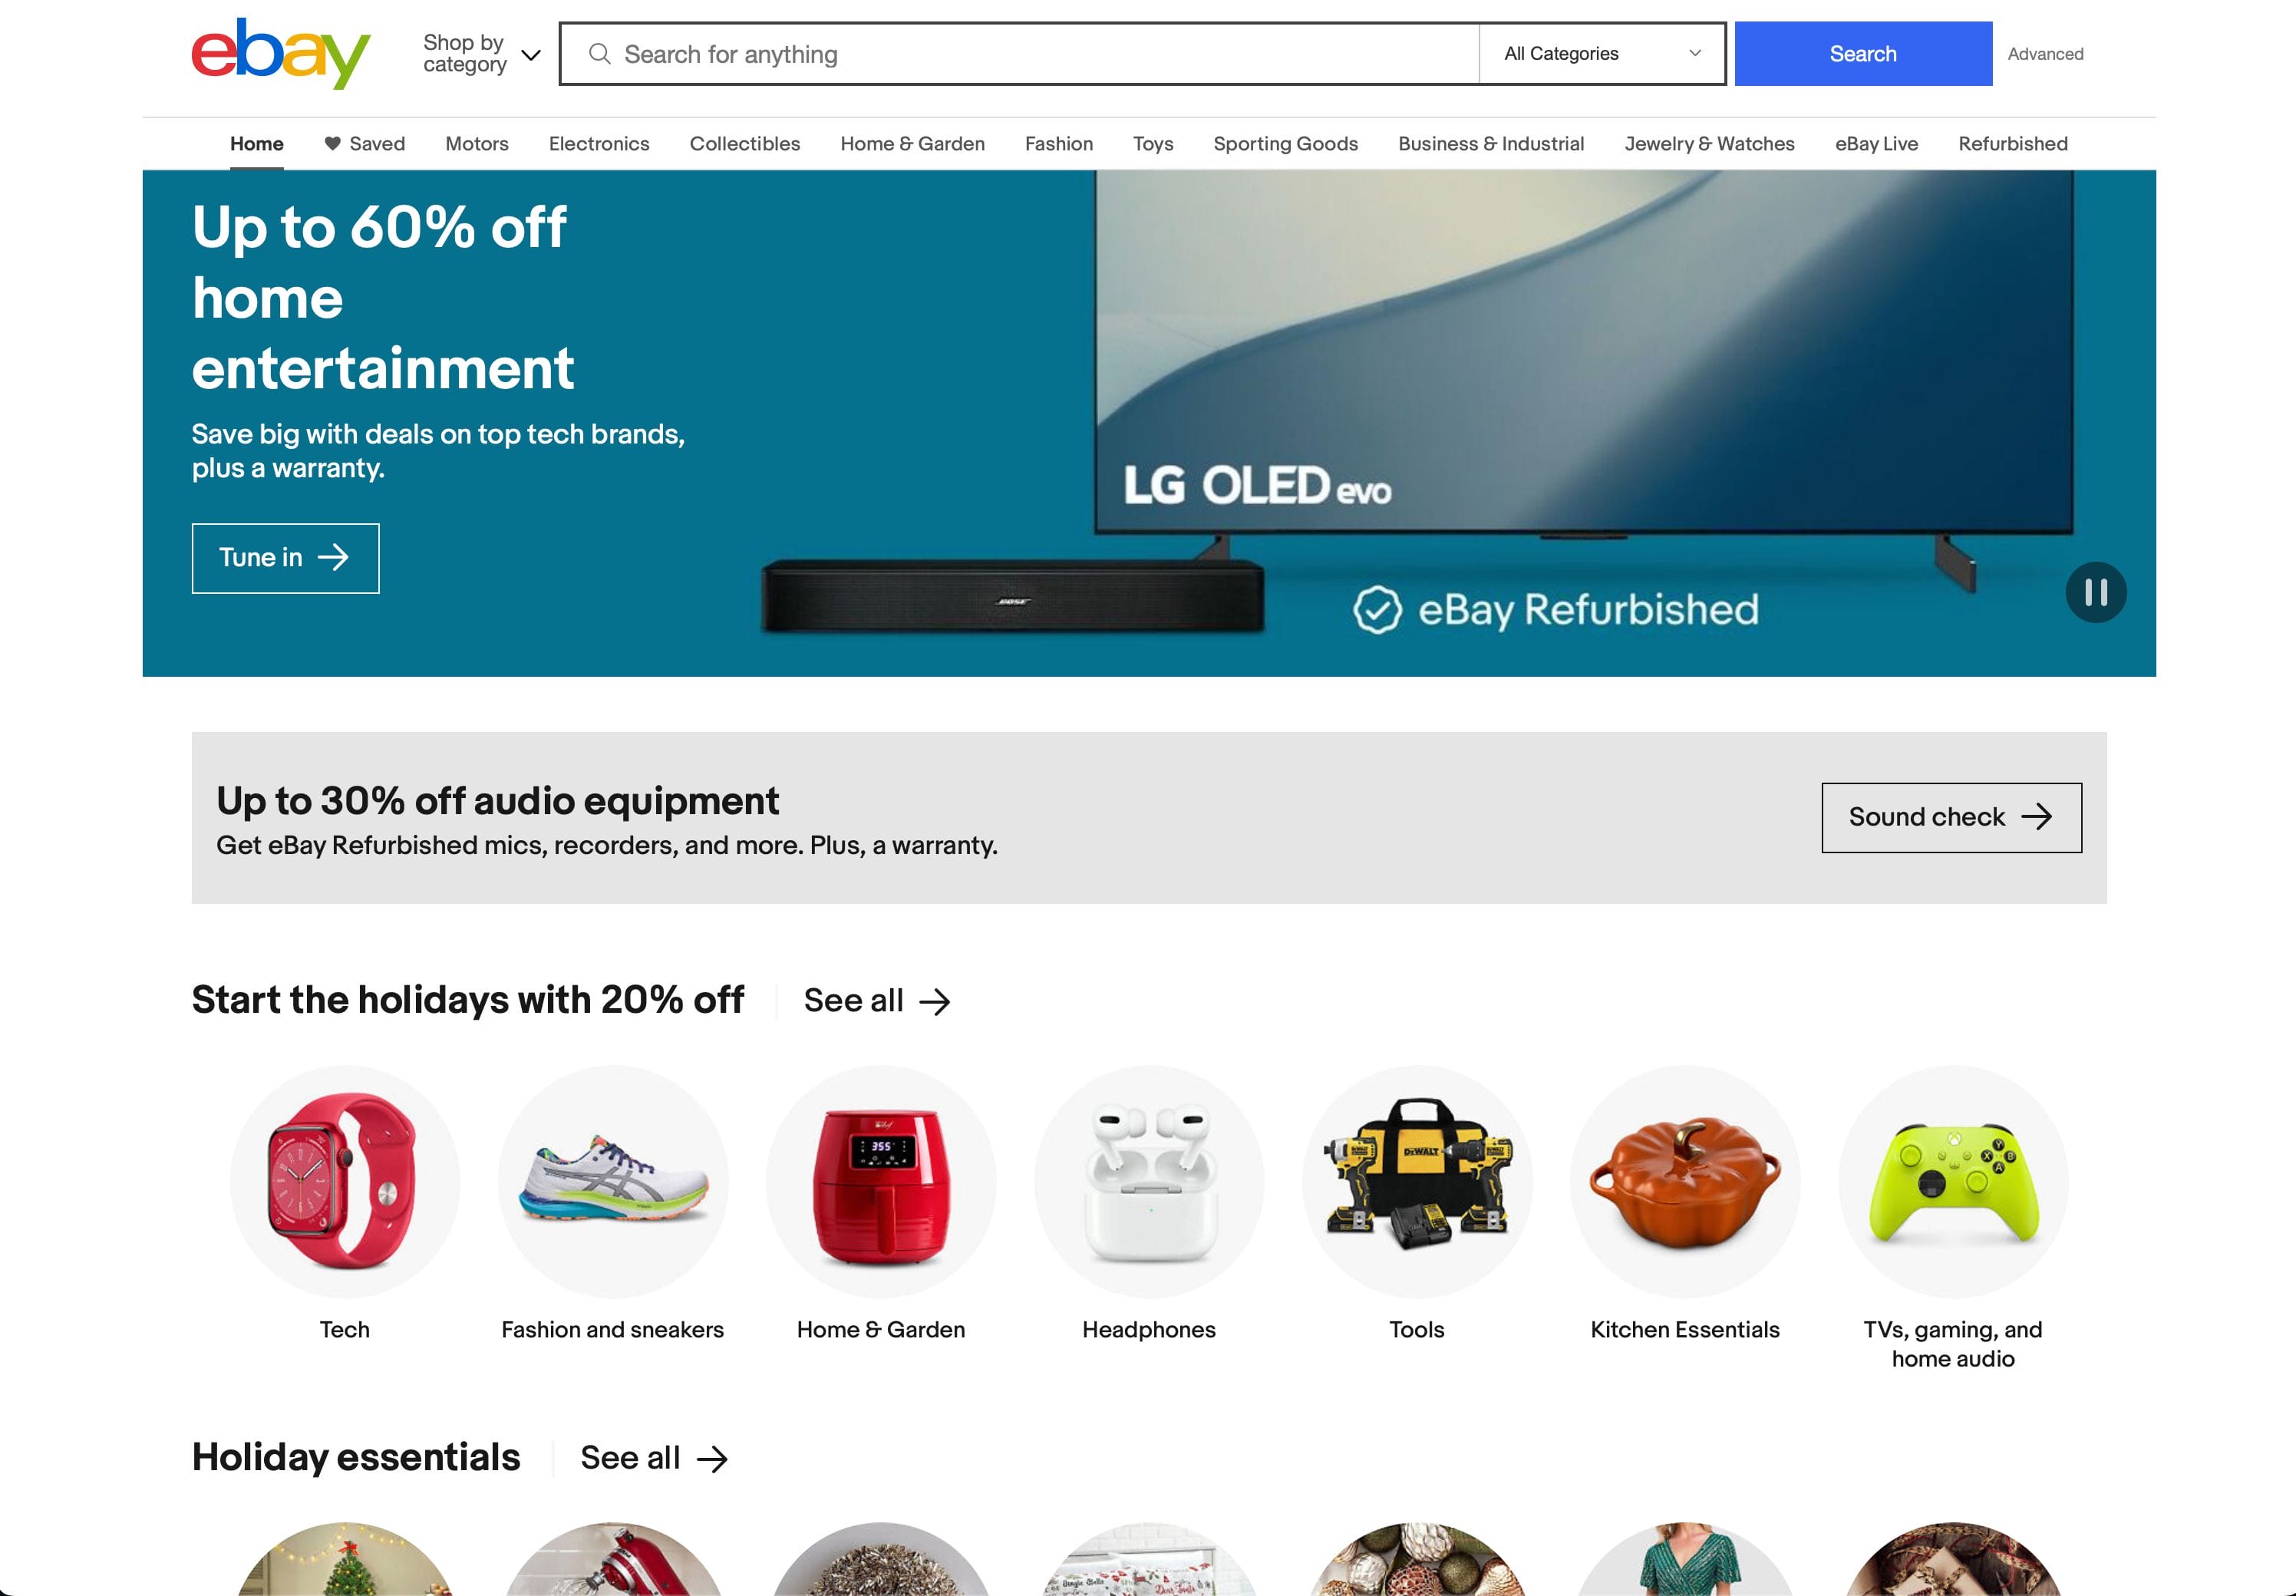 Screen shot of eBay website home page